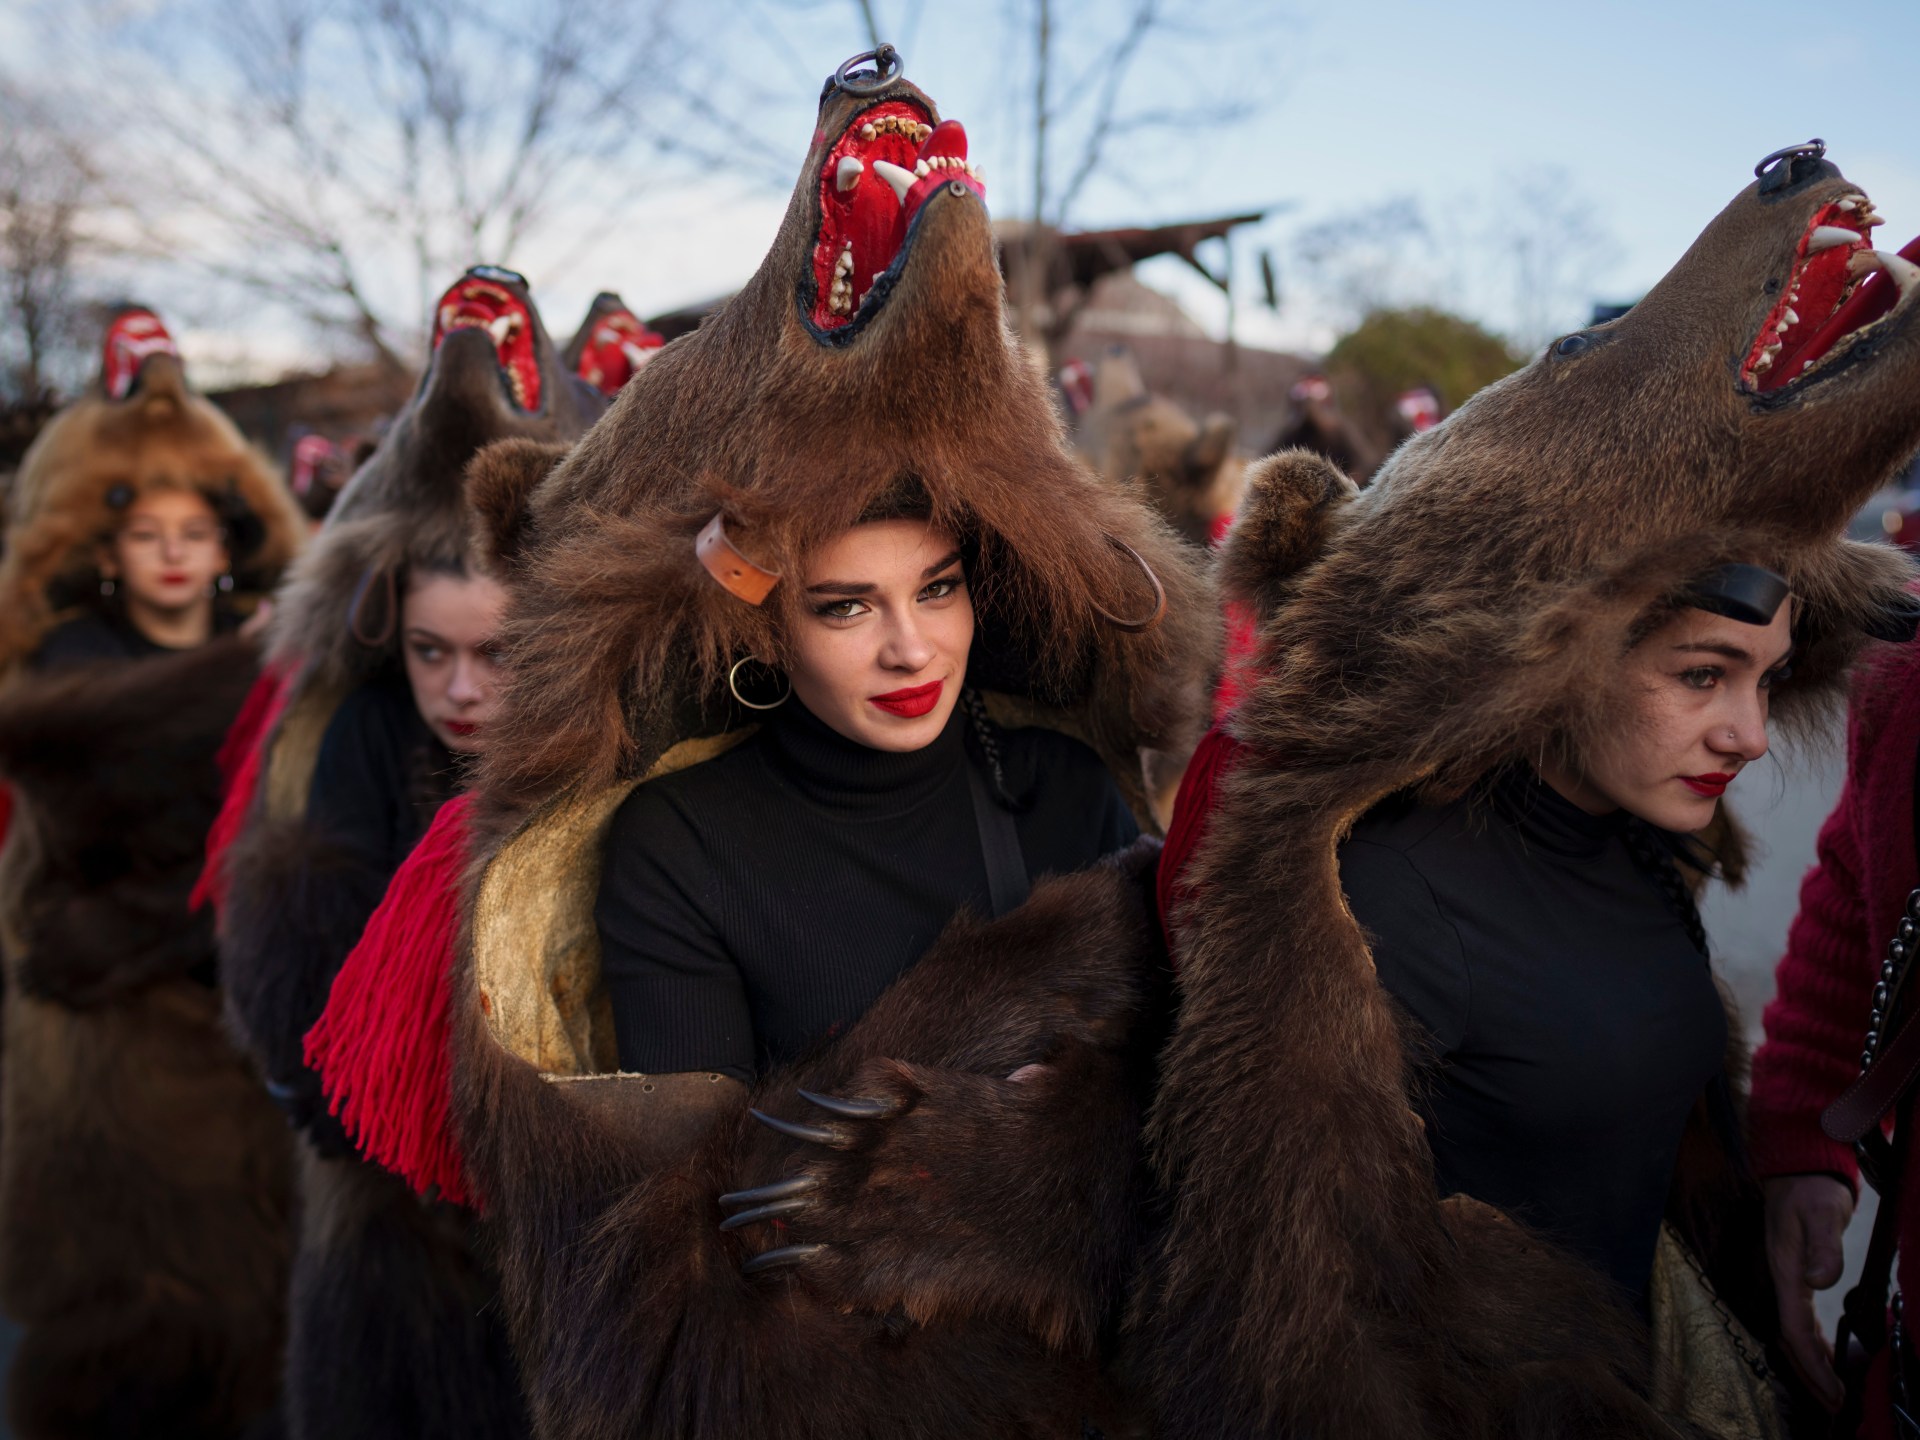 Photos: Romania’s annual Dancing Bears Festival to ‘ward off evil spirits’ | In Pictures